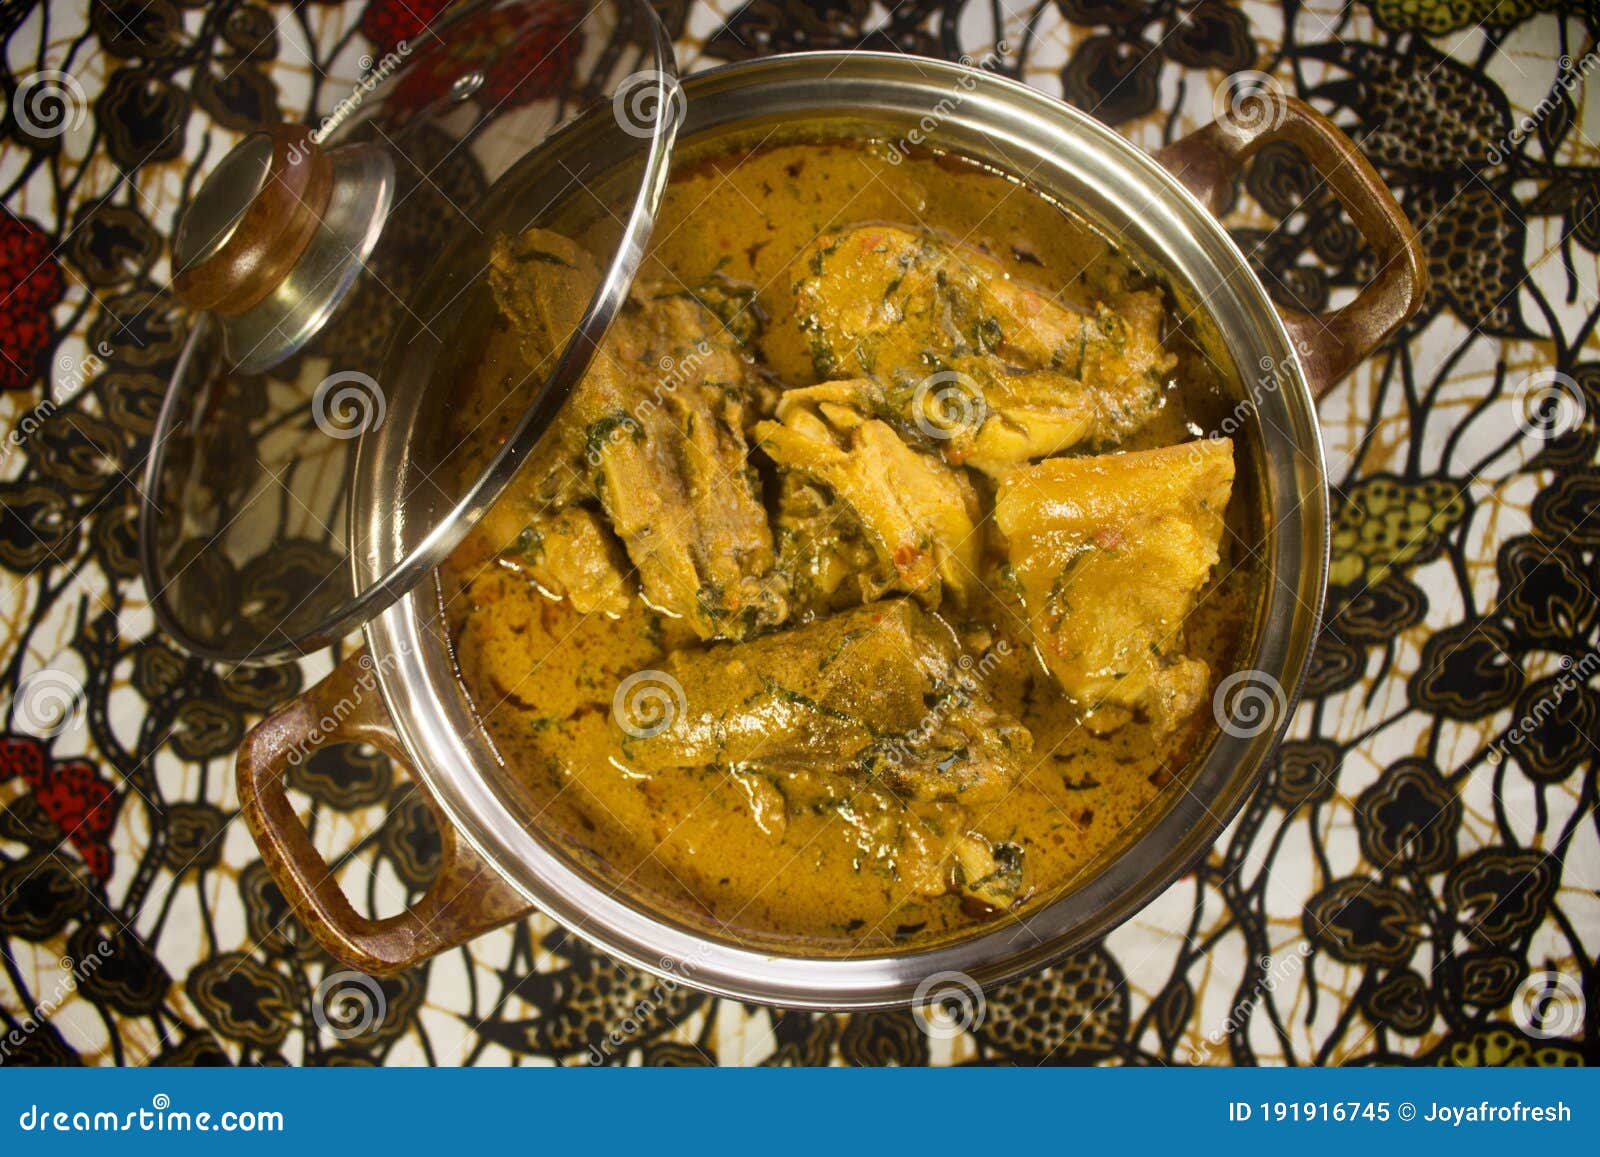 a pot of delicious groundnut soup looking like nigerian banga soup